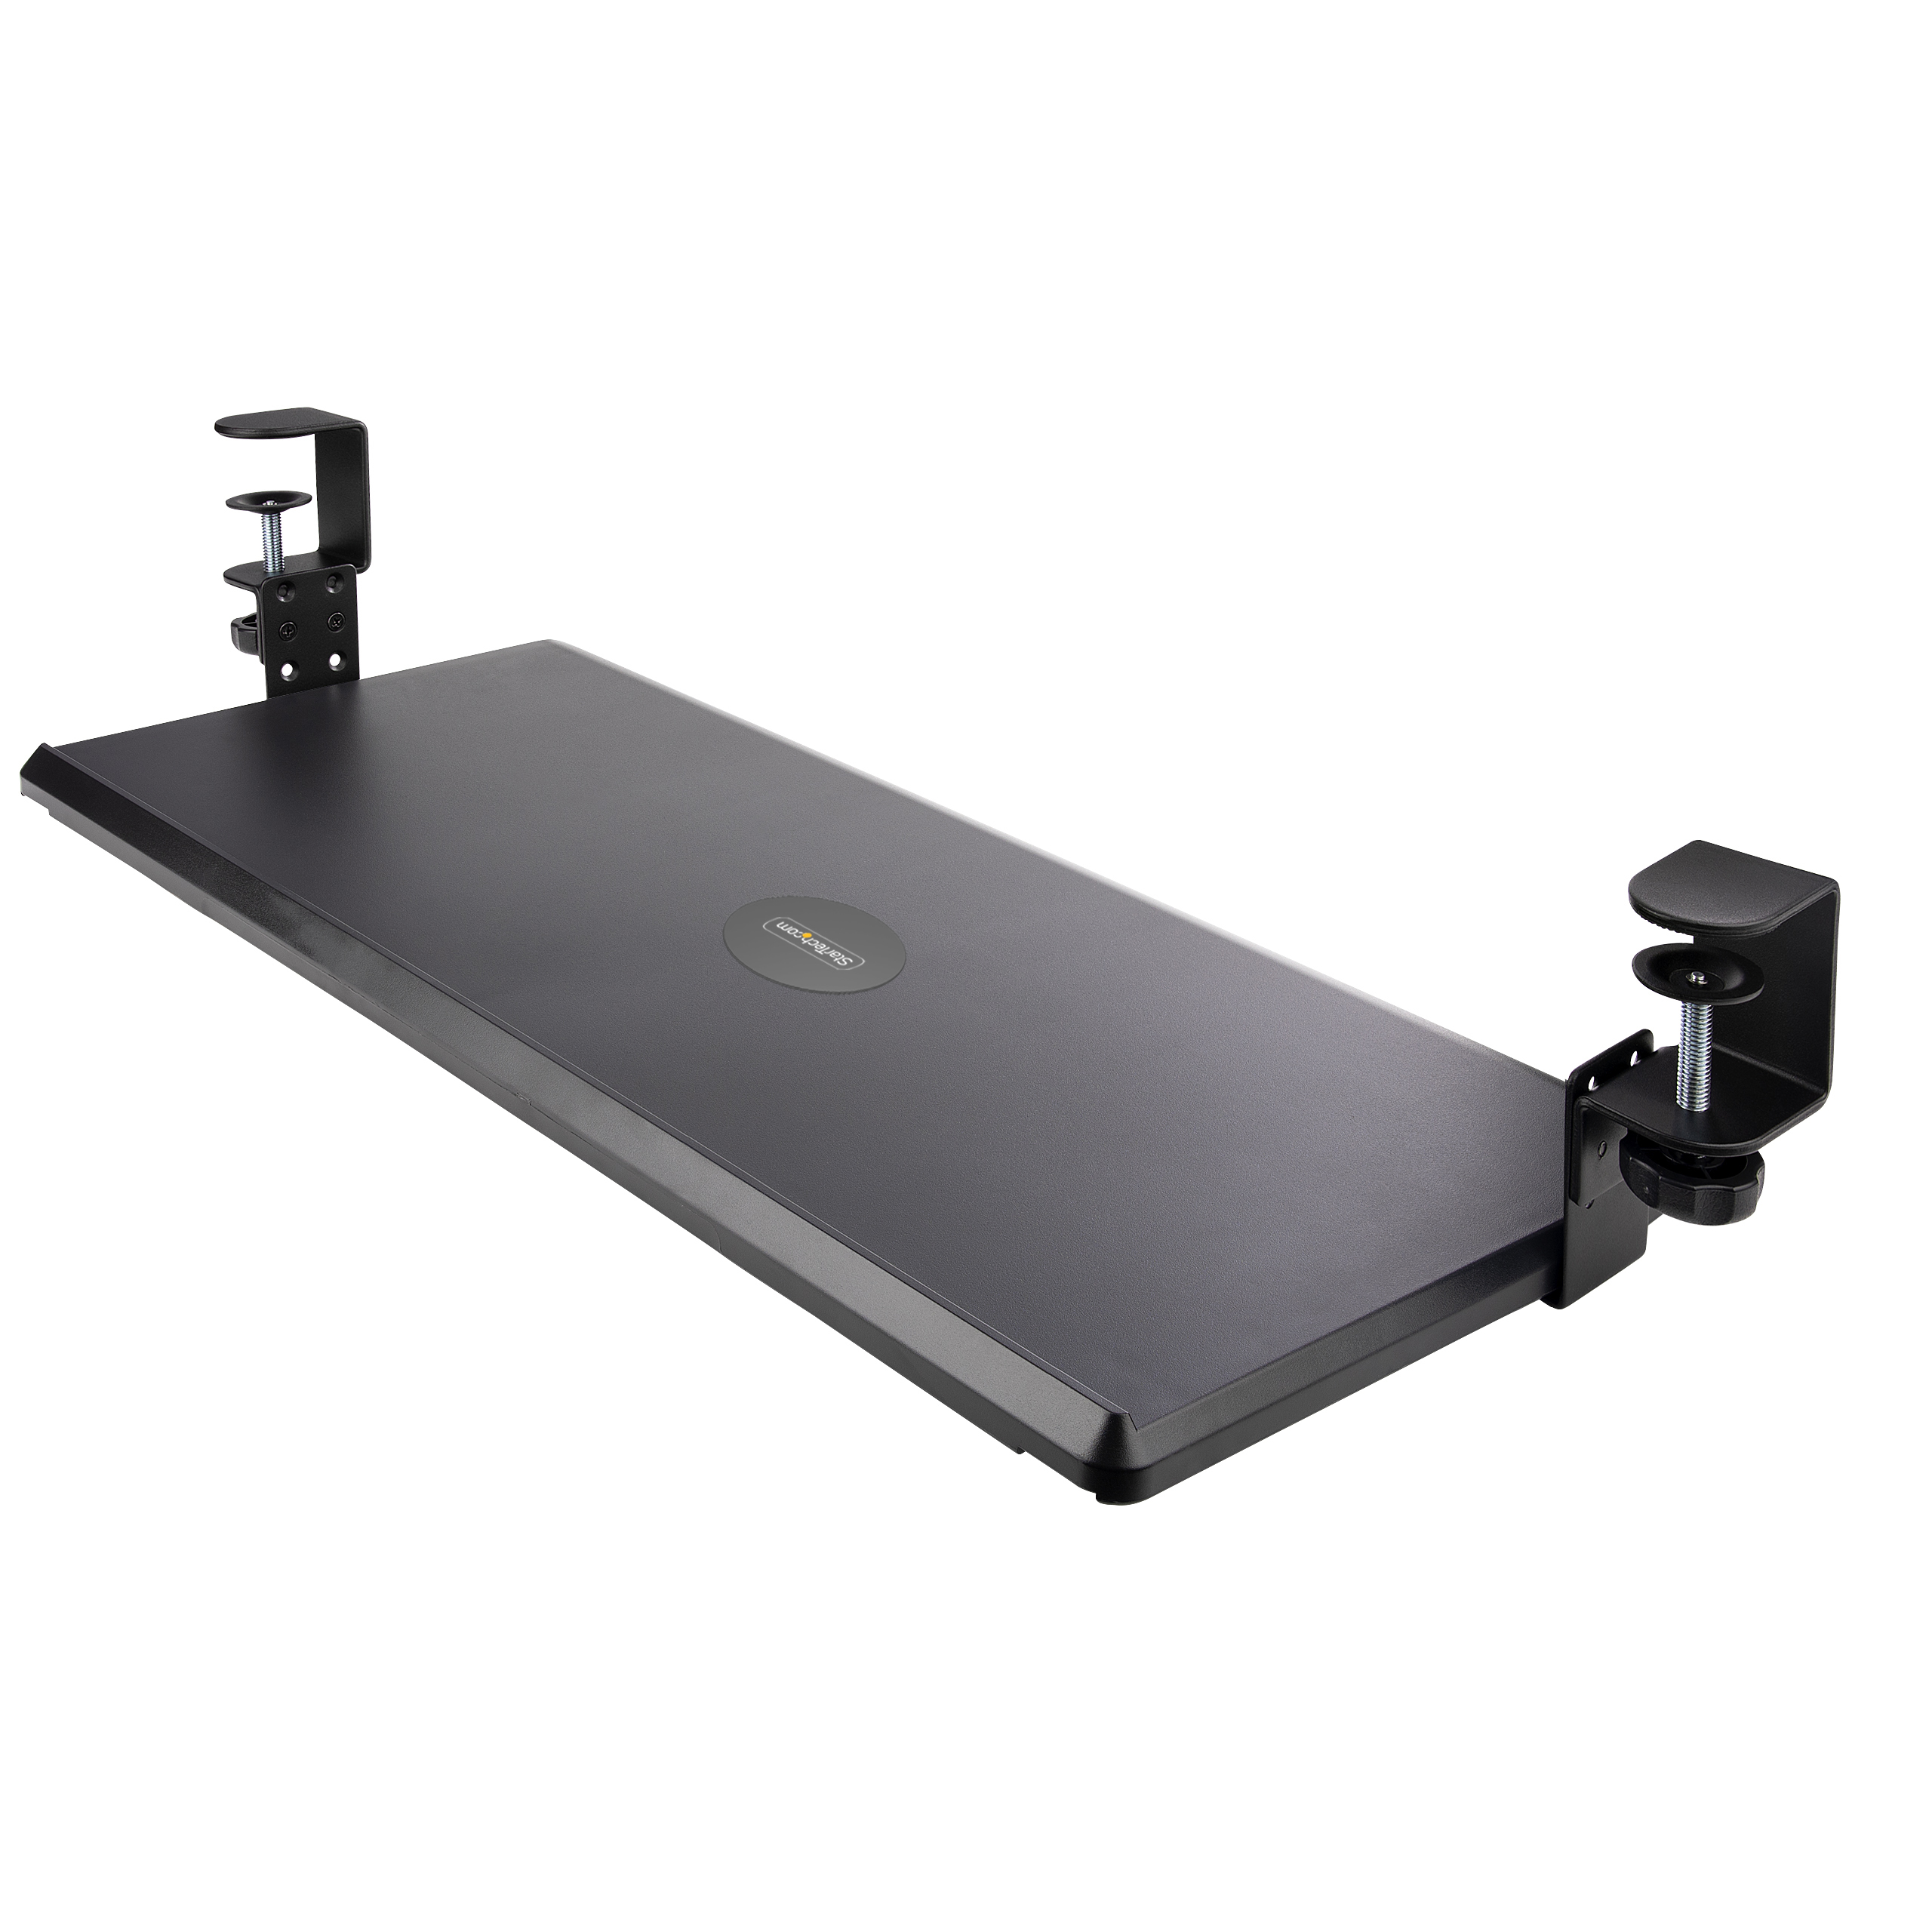 StarTech.com Under-Desk Keyboard Tray, Clamp-on Keyboard Holder, Supports Up To 12kg (26.5lb), Sliding Keyboard And Mouse Drawer With C-Clamps, Height Adjustable Keyboard Tray - Black - Ergon - C2000